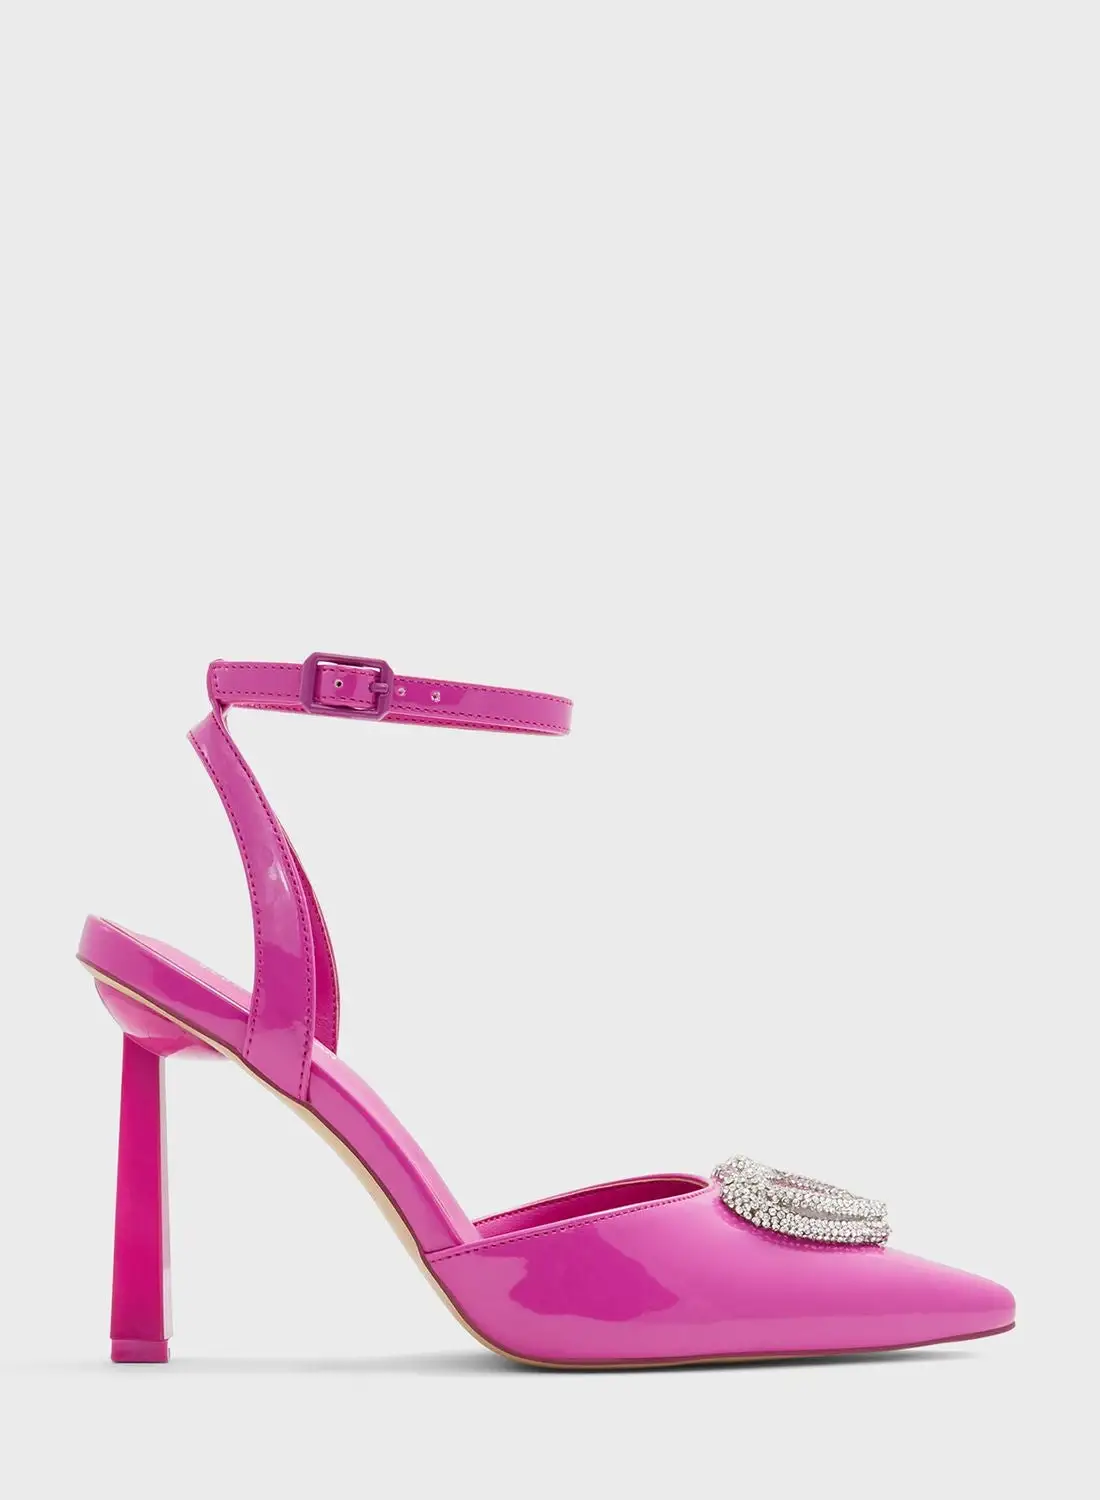 CALL IT SPRING Angellina Pumps